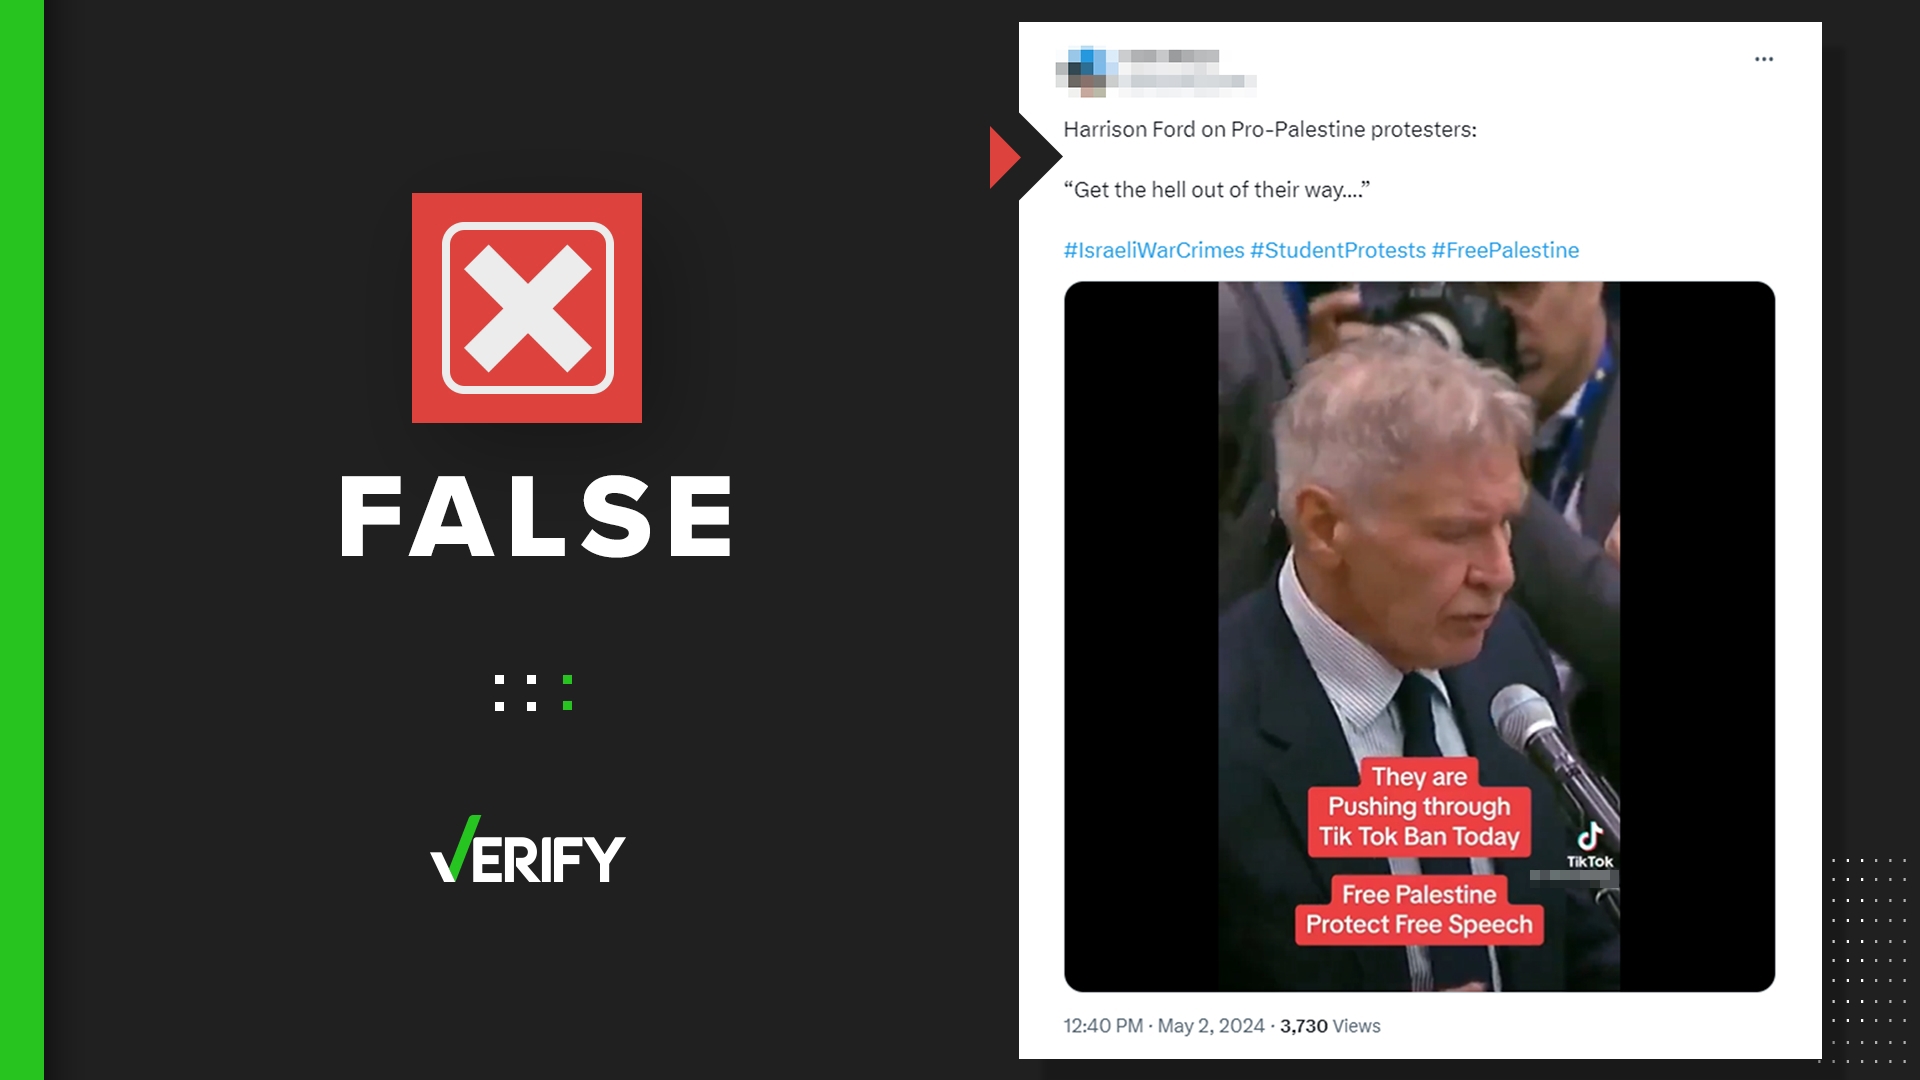 Posts falsely claim Harrison Ford was caught on camera supporting pro-Palestine protesters. The clip shows him speaking at a climate change summit in 2019.